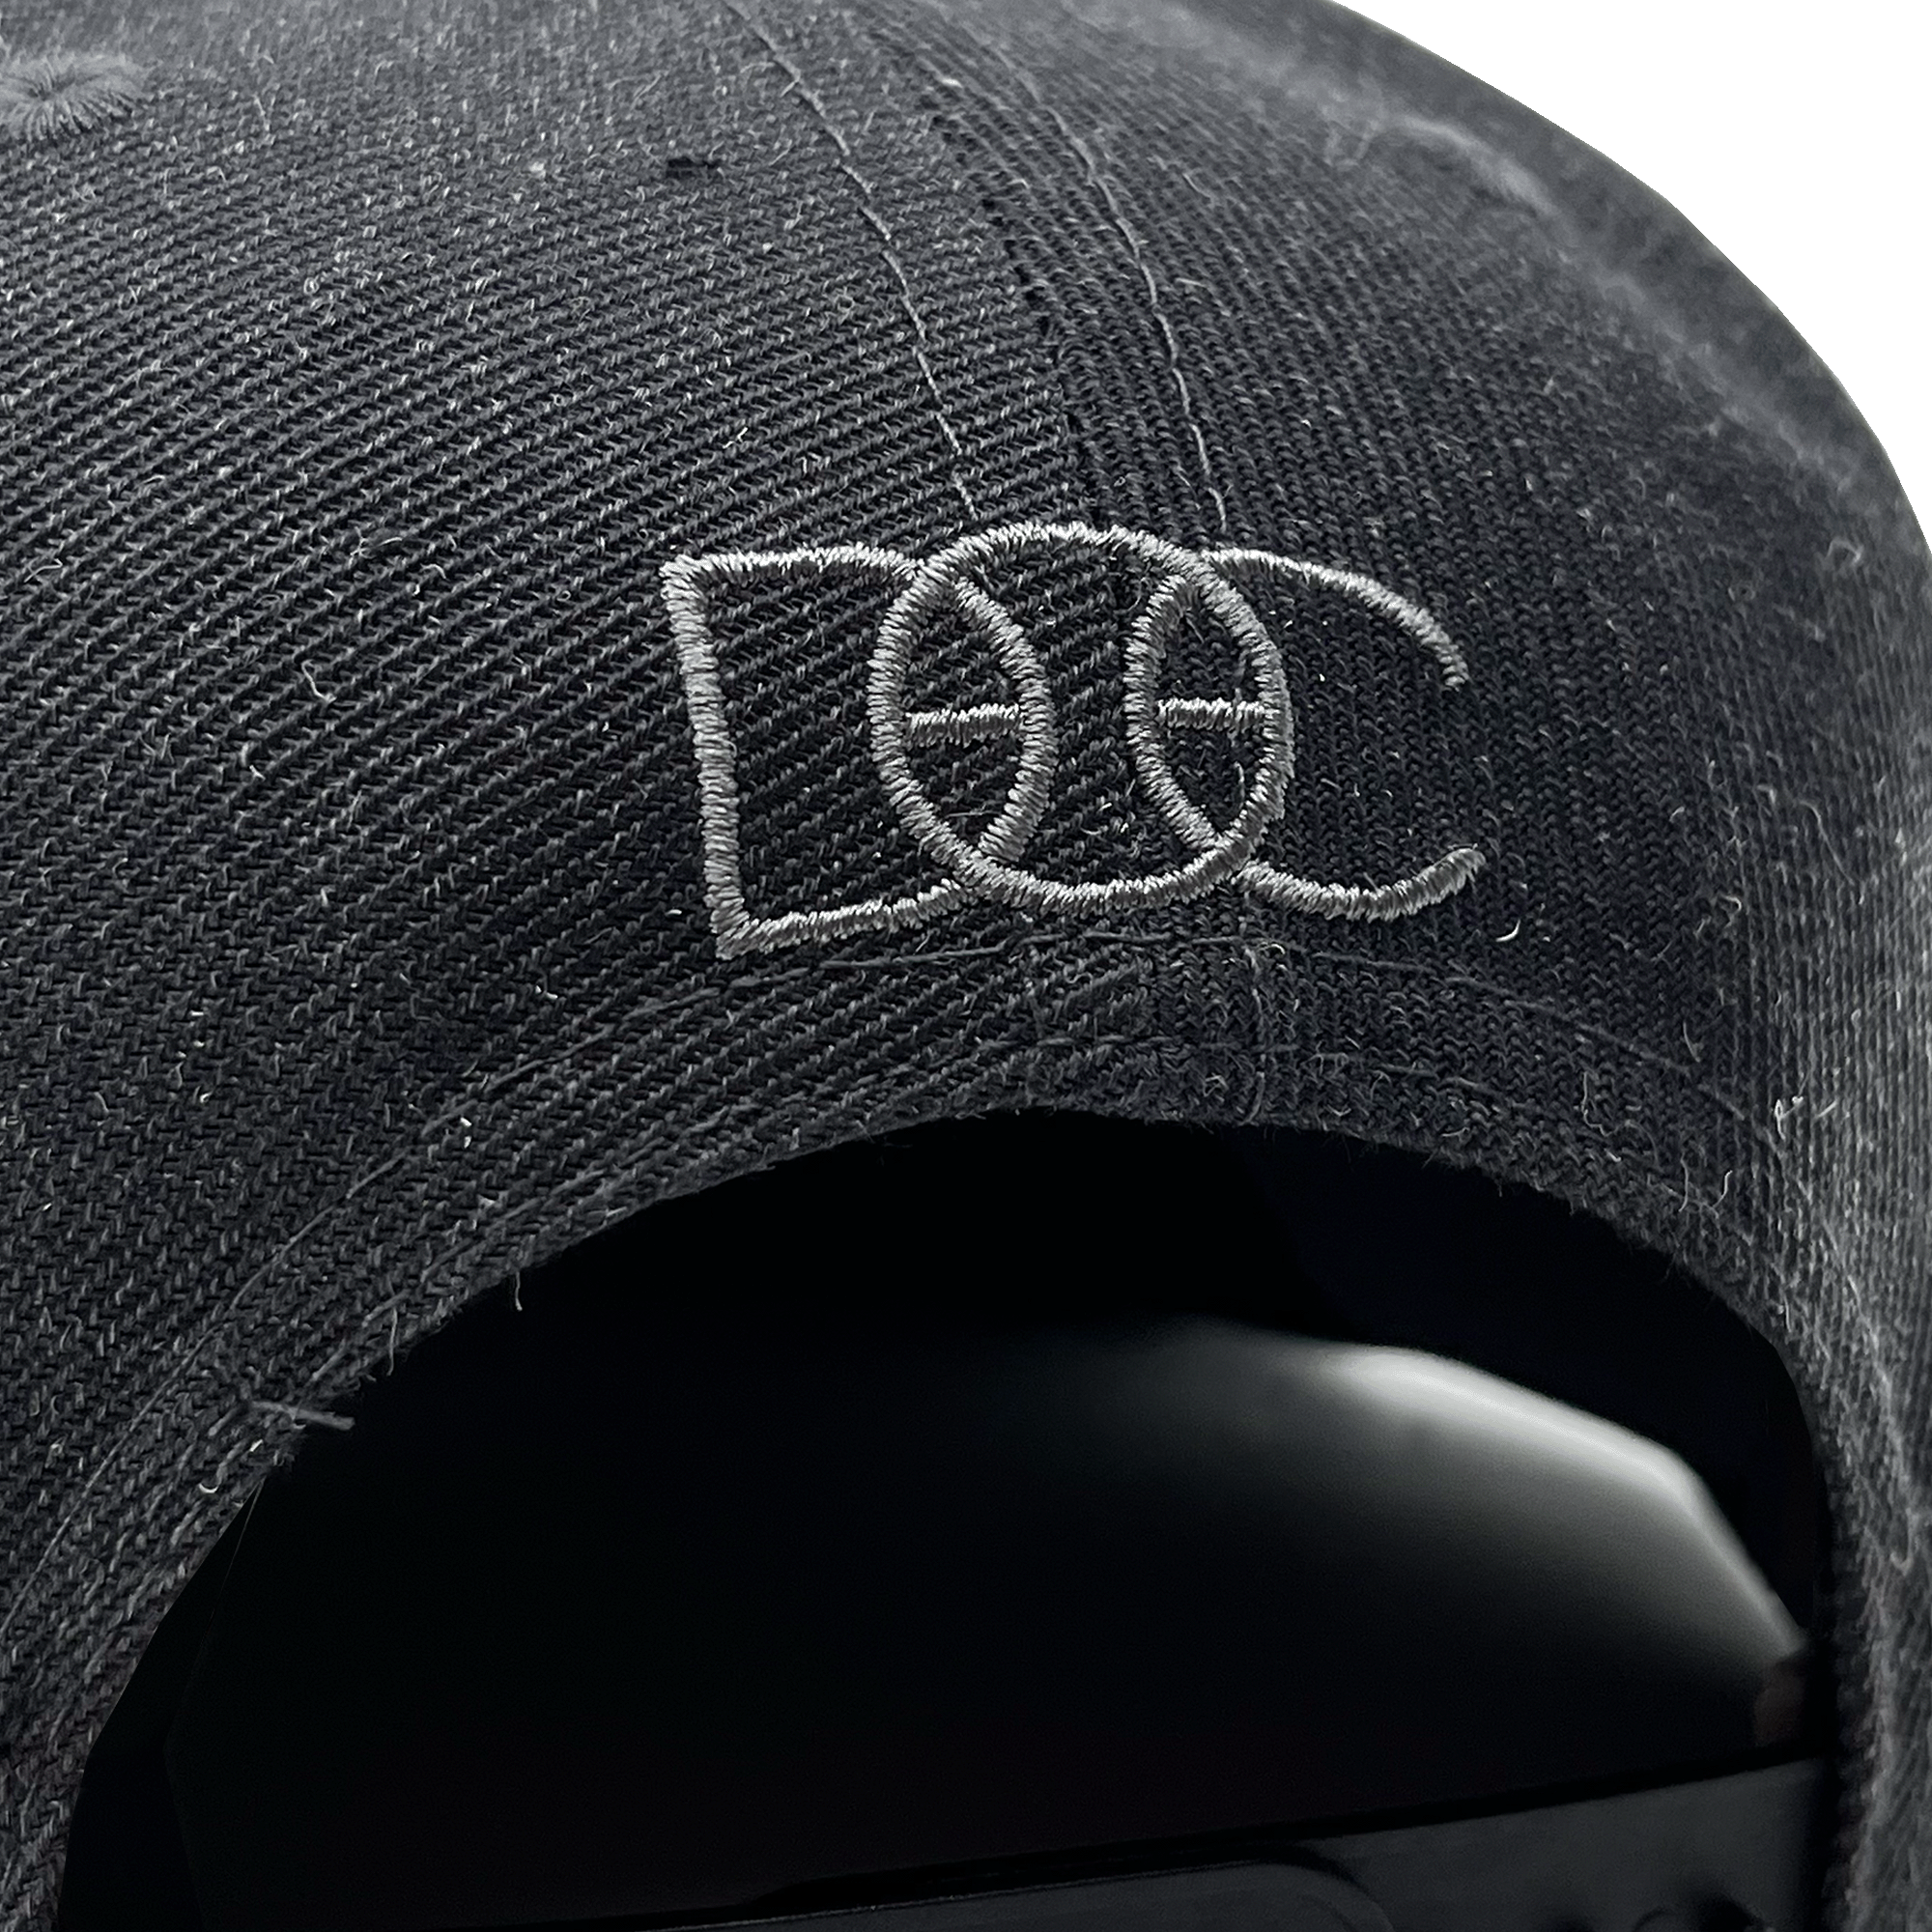 Close-up of grey embroidered overlapping DOC wordmark on the back of a charcoal hat.